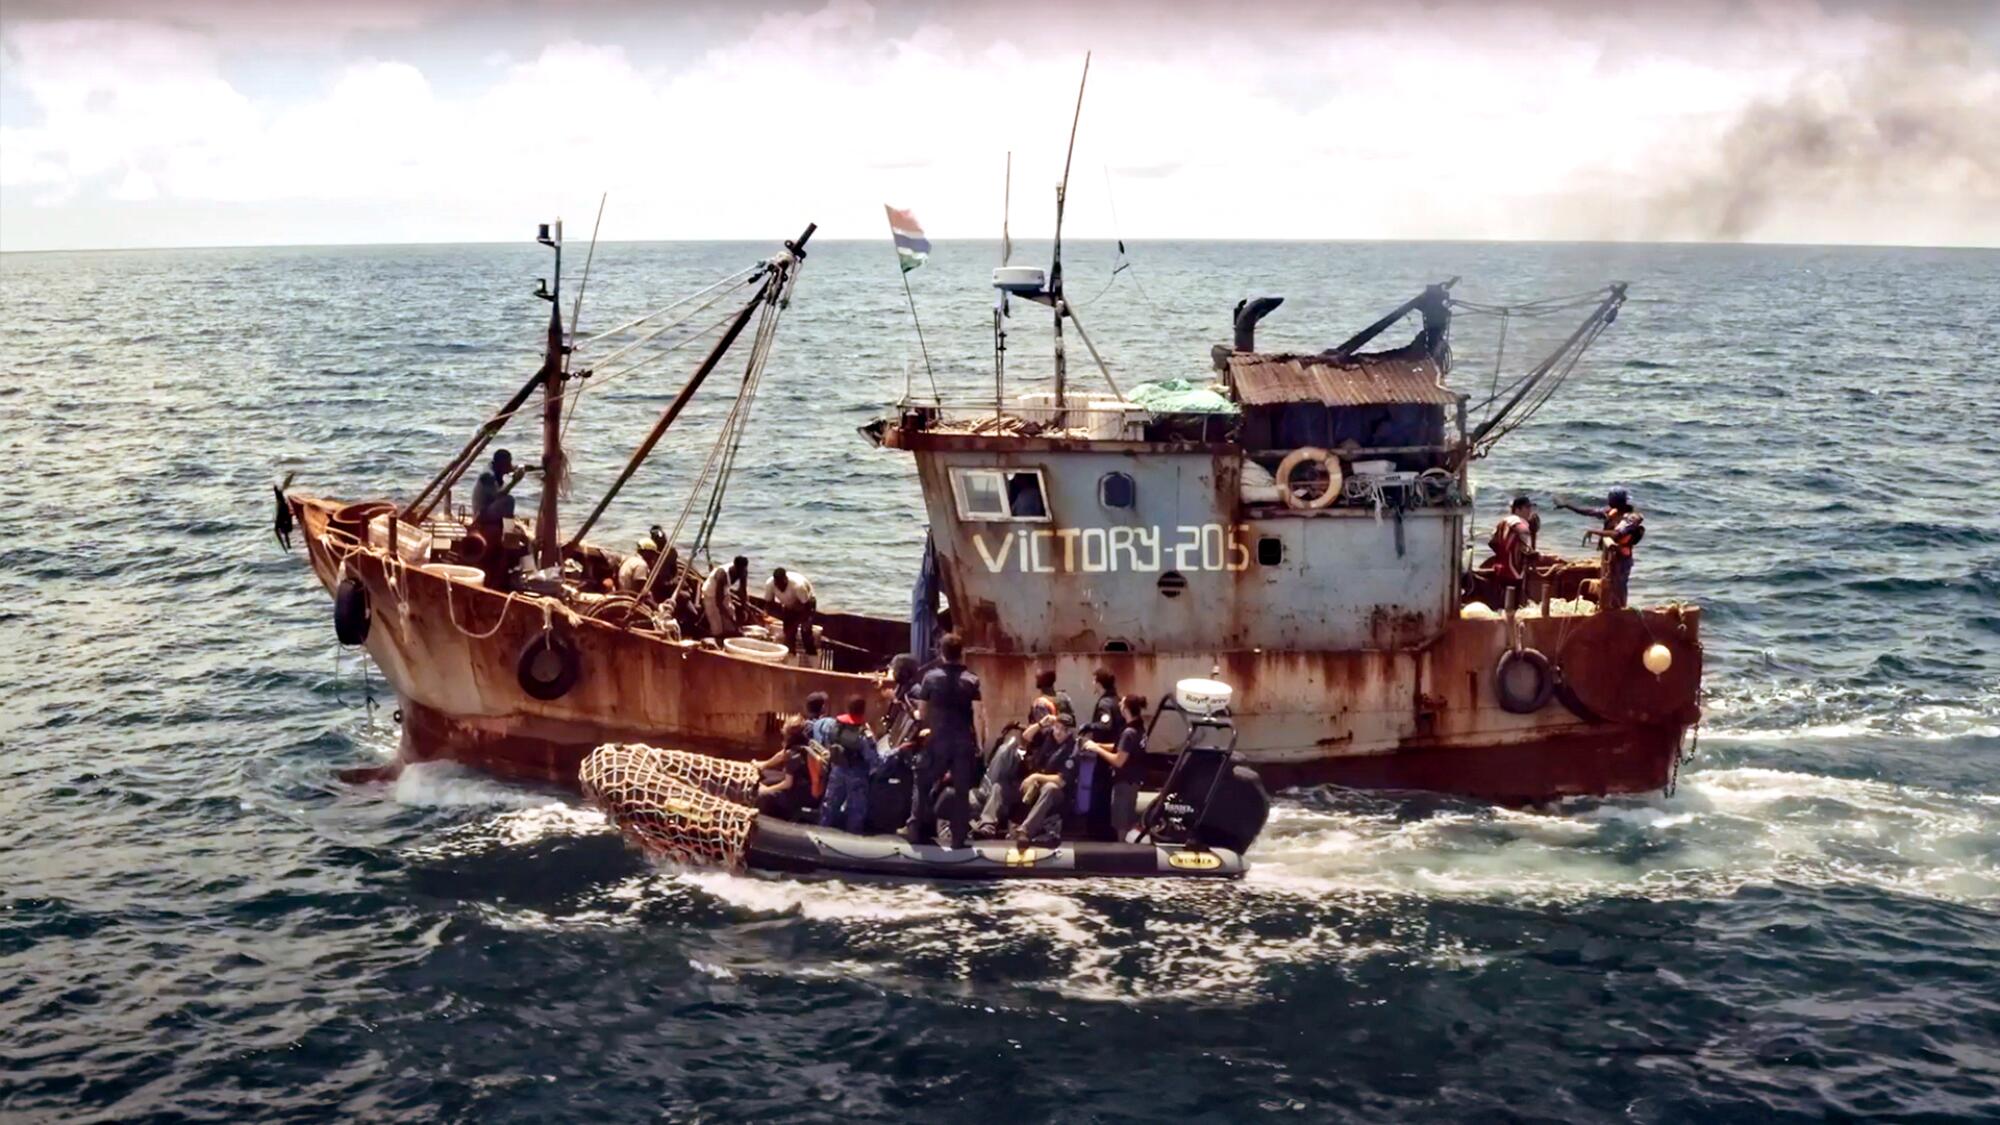 A rust-covered fishing boat with the name Victory and a dinghy carrying people next to it, on the ocean